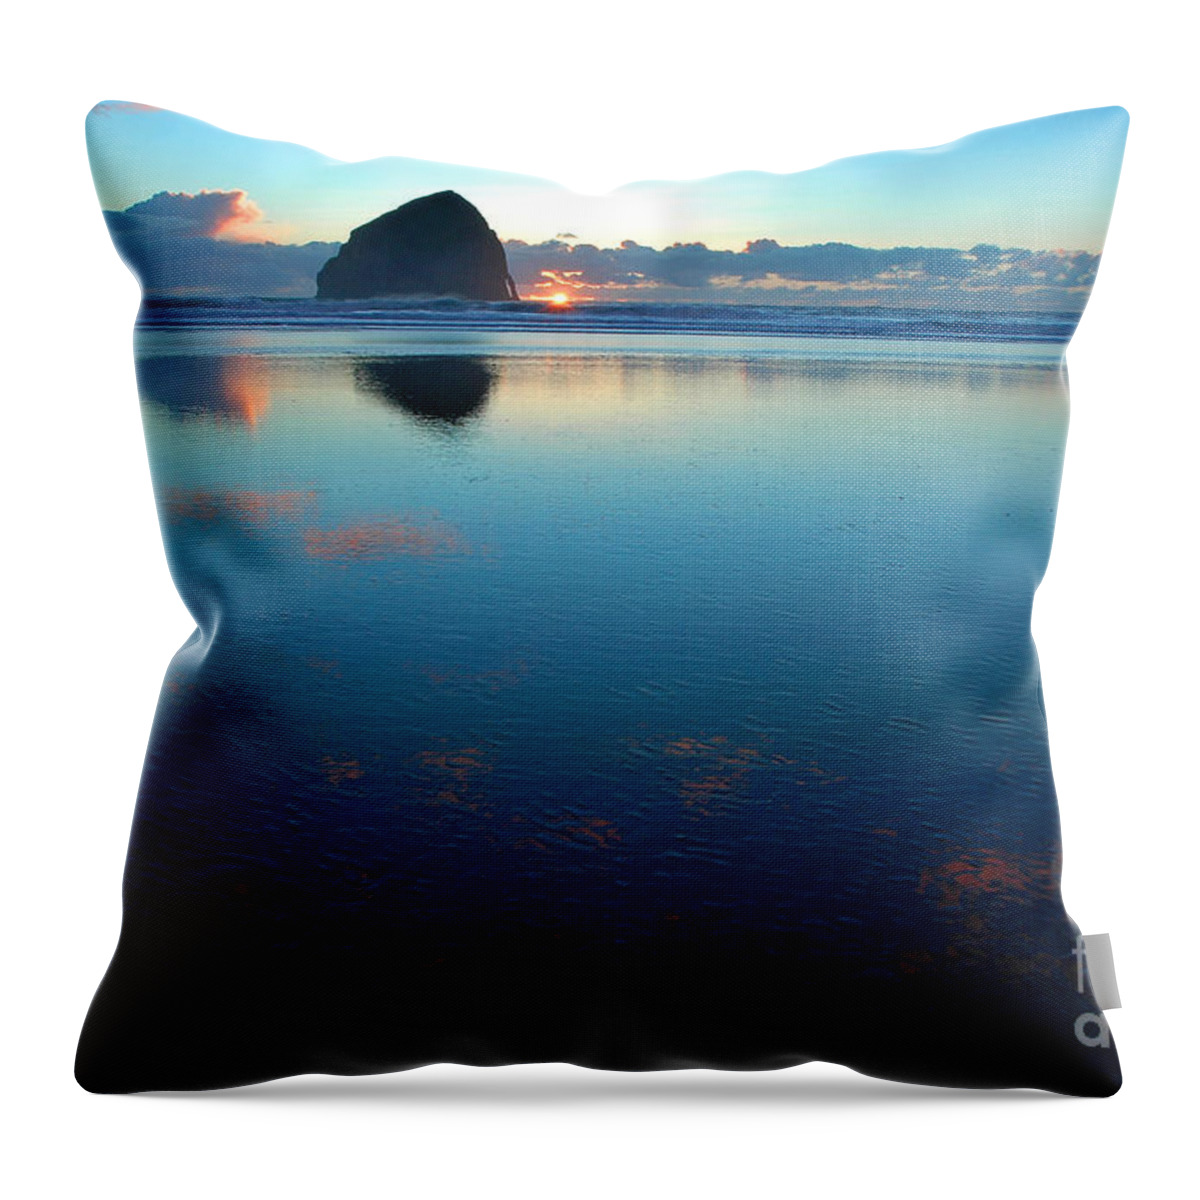 Afterglow Throw Pillow featuring the photograph Cape Kiwanda Seascape by Nick Boren